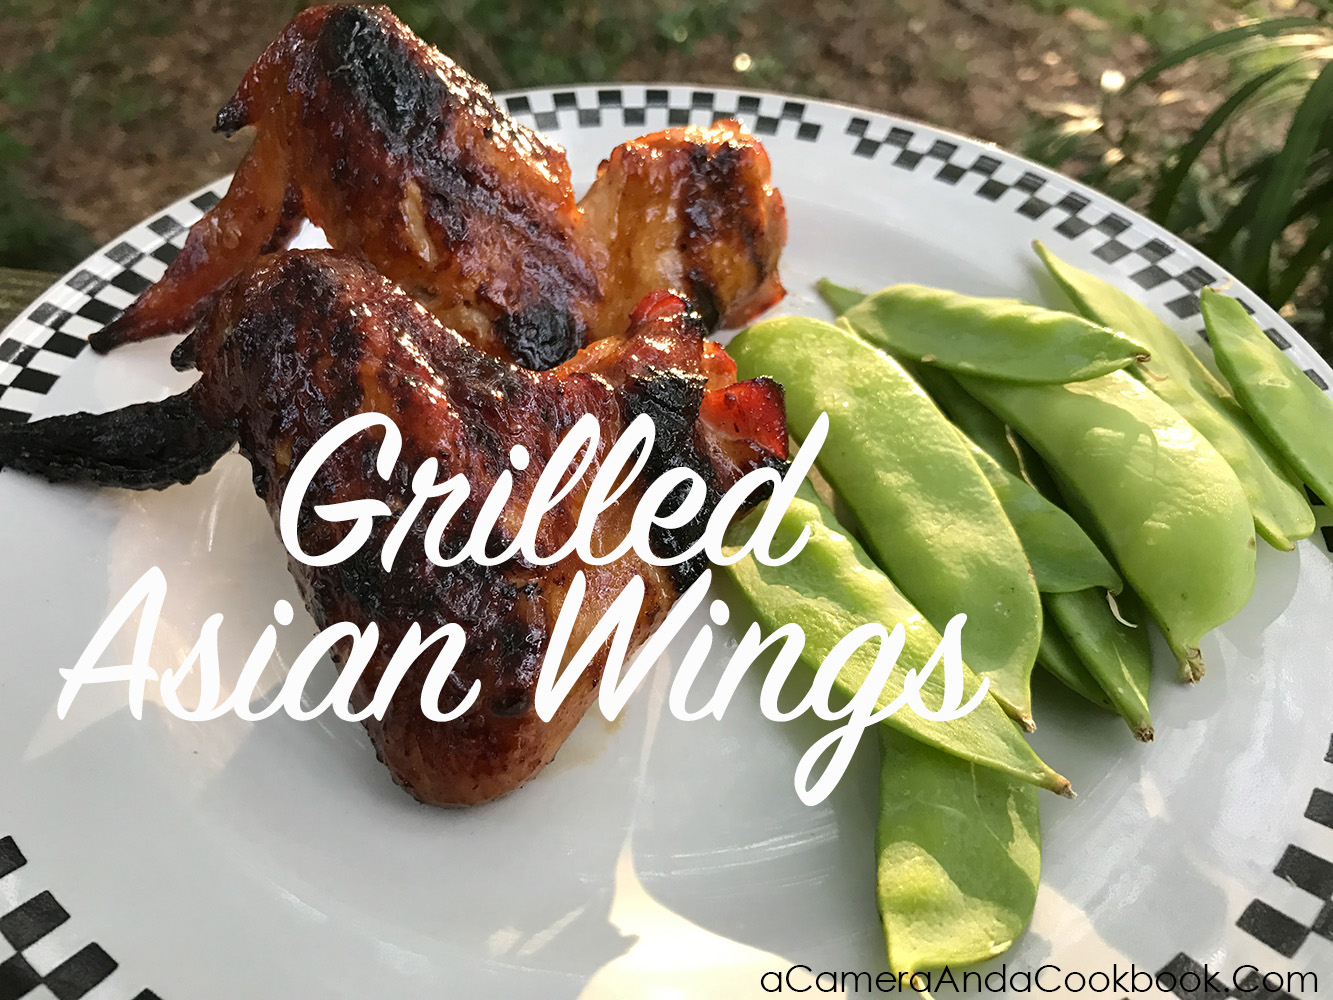 Grilled Asian Chicken Wings